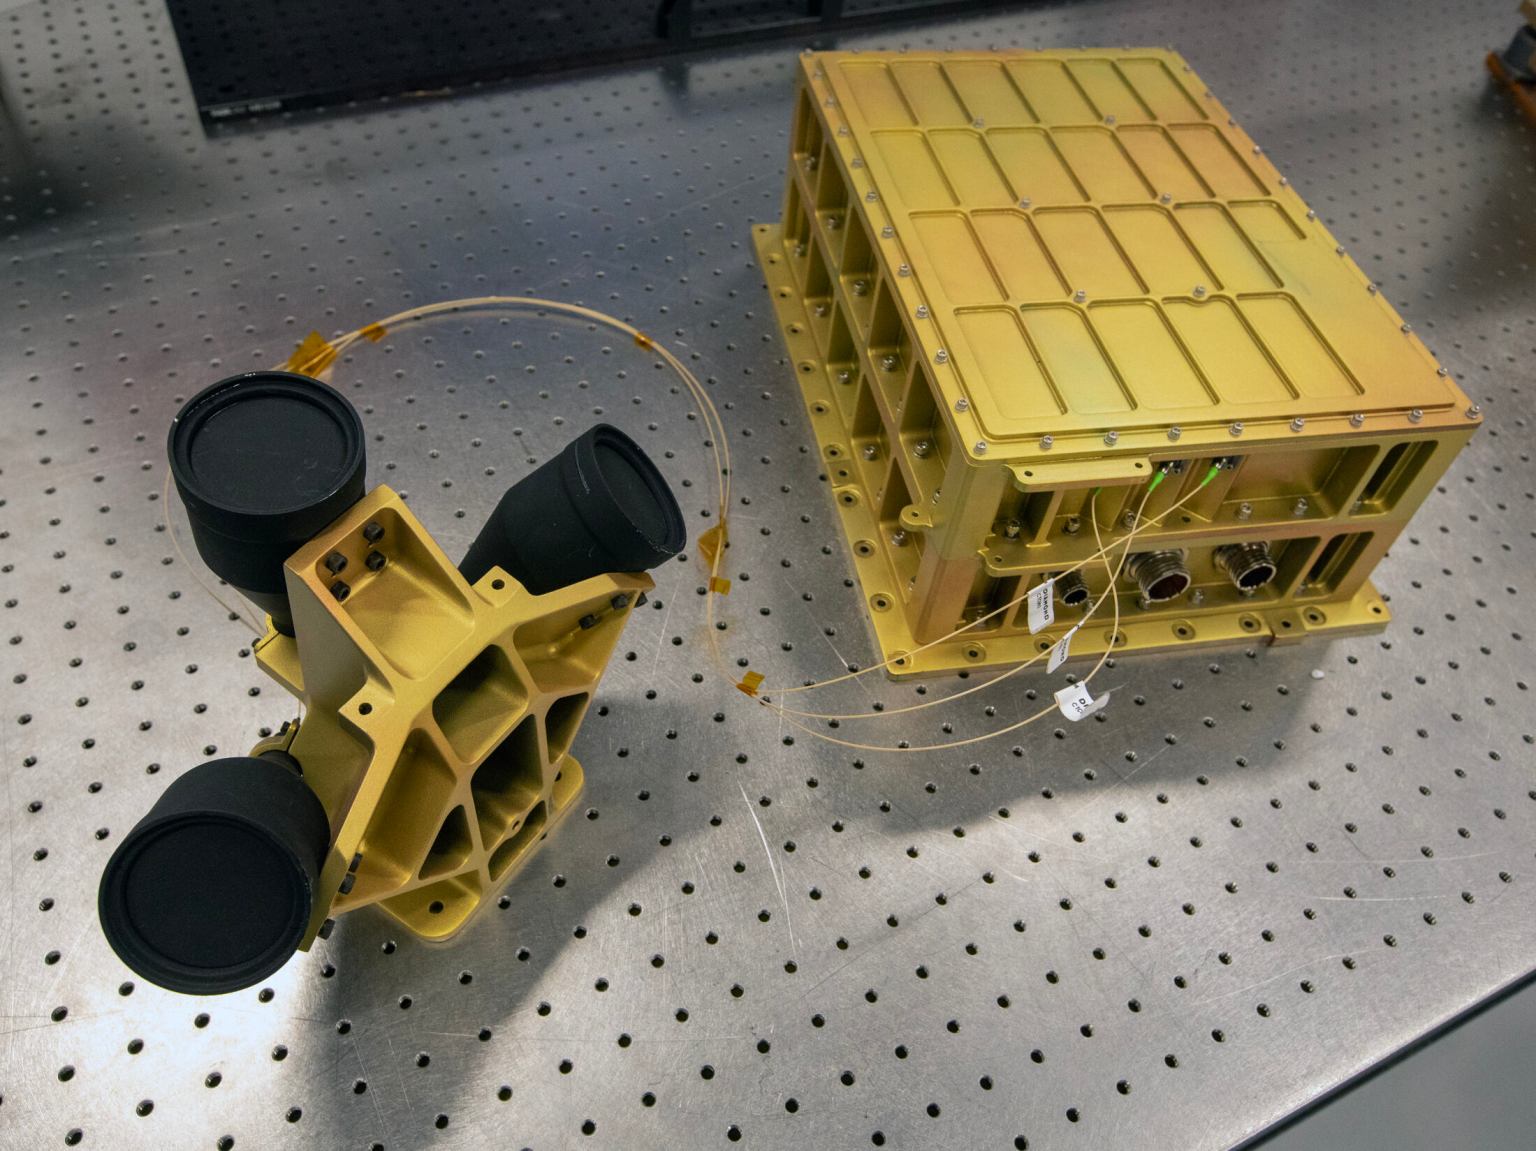 Navigation Doppler Lidar is a guidance system that uses laser pulses to precisely measure velocity and distance. NASA will demonstrate NDL’s capabilities in the lunar environment during the IM-1 mission.